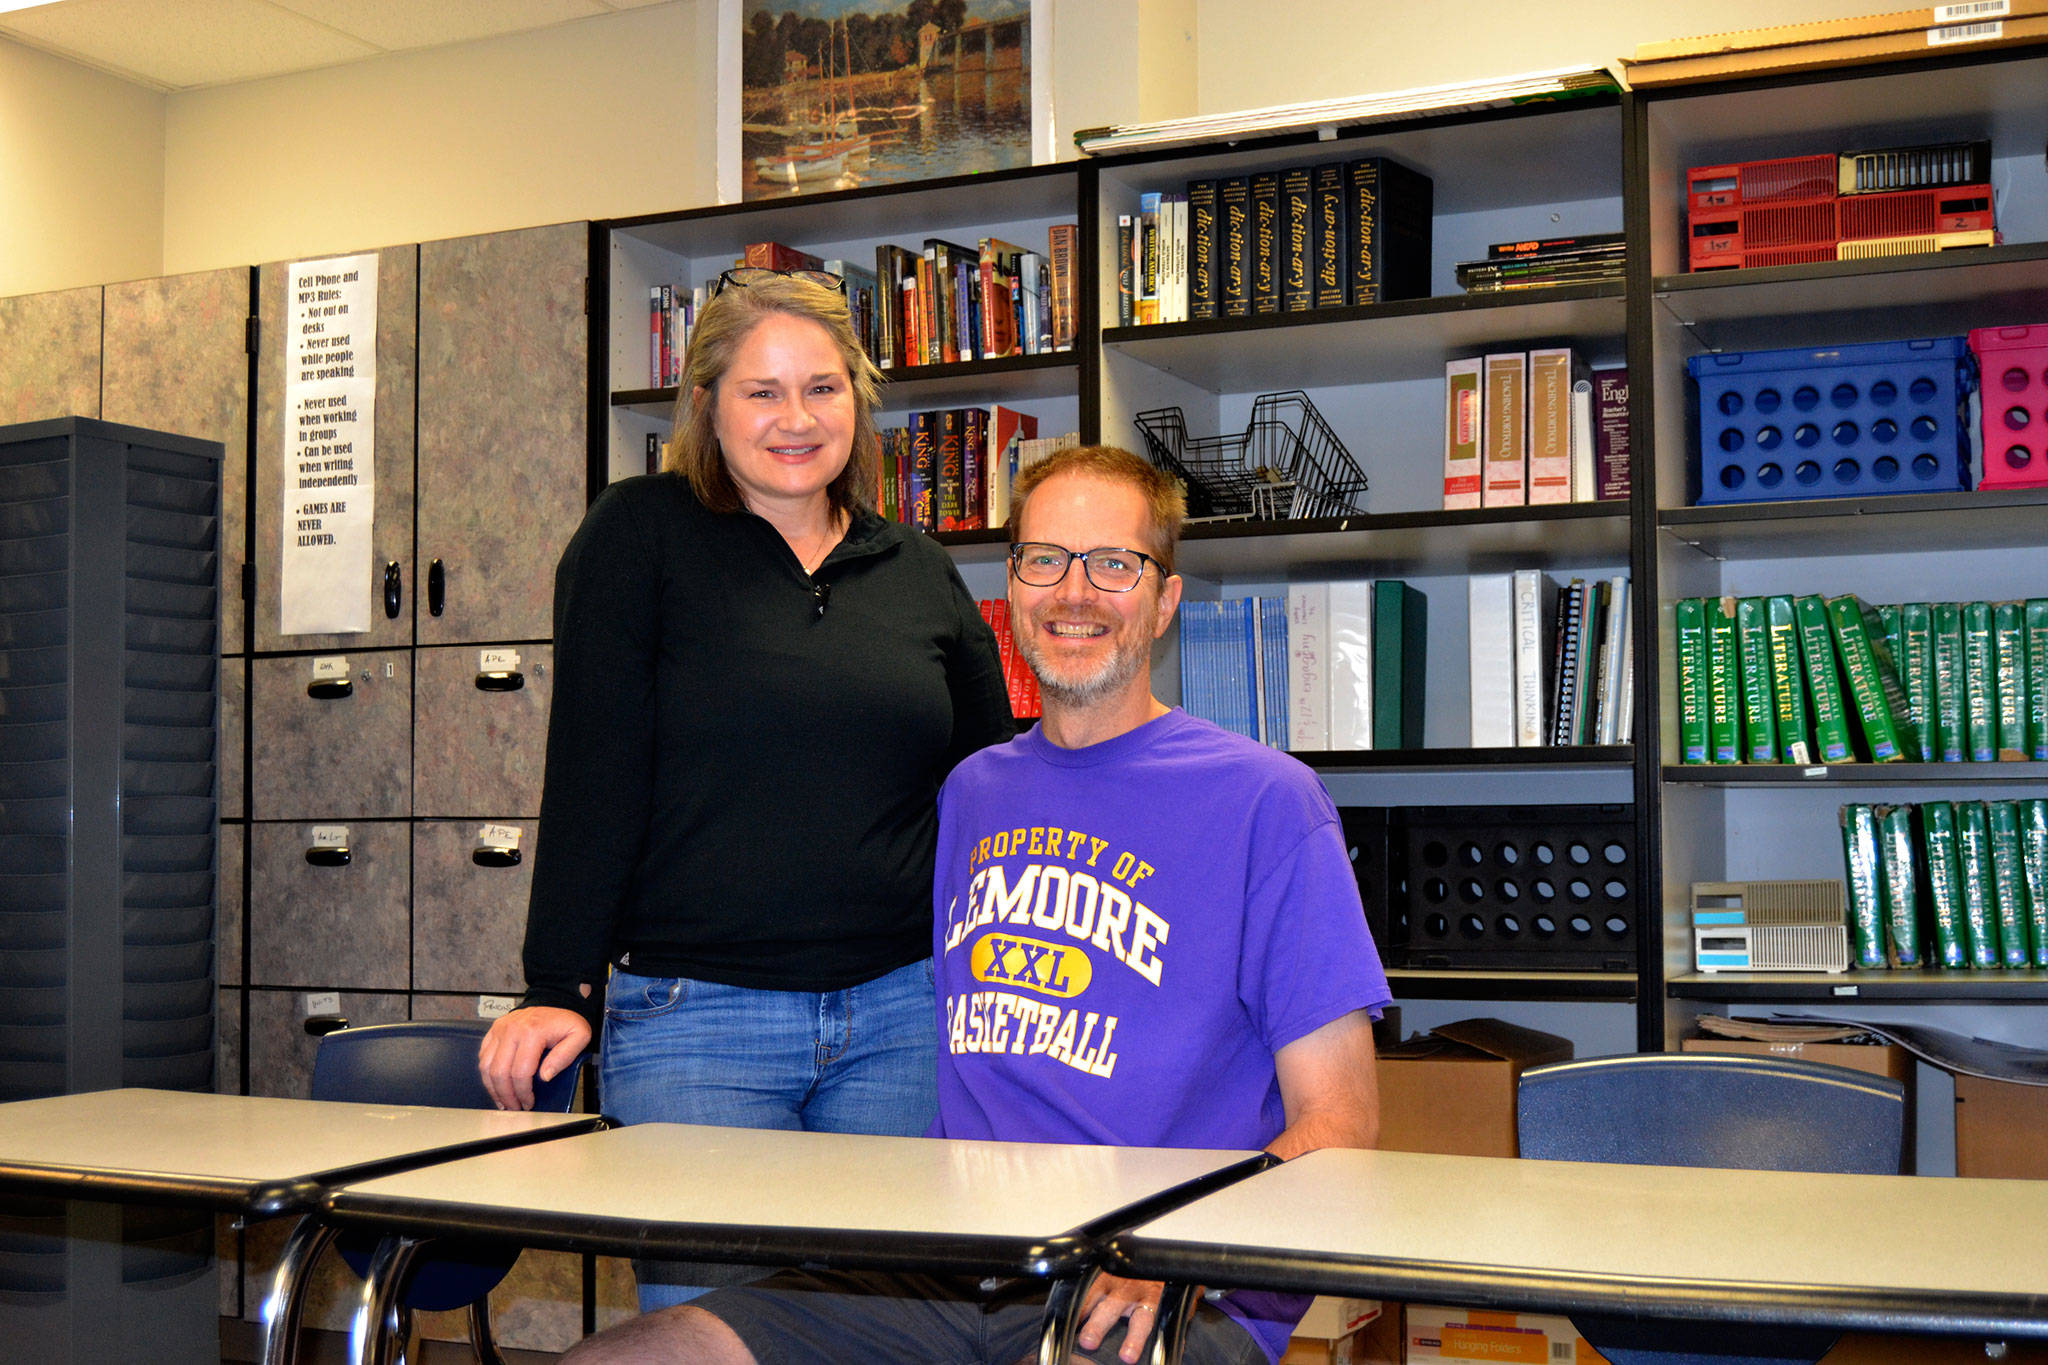 Jon and Cheryl Eekhoff say they are ready to start the school year at Sequim High School after taking some time off last school year after Jon fell from a ladder and sustained head trauma. Jon will teach ninth grade English and Cheryl 10th grade English. Sequim Gazette photo by Matthew Nash